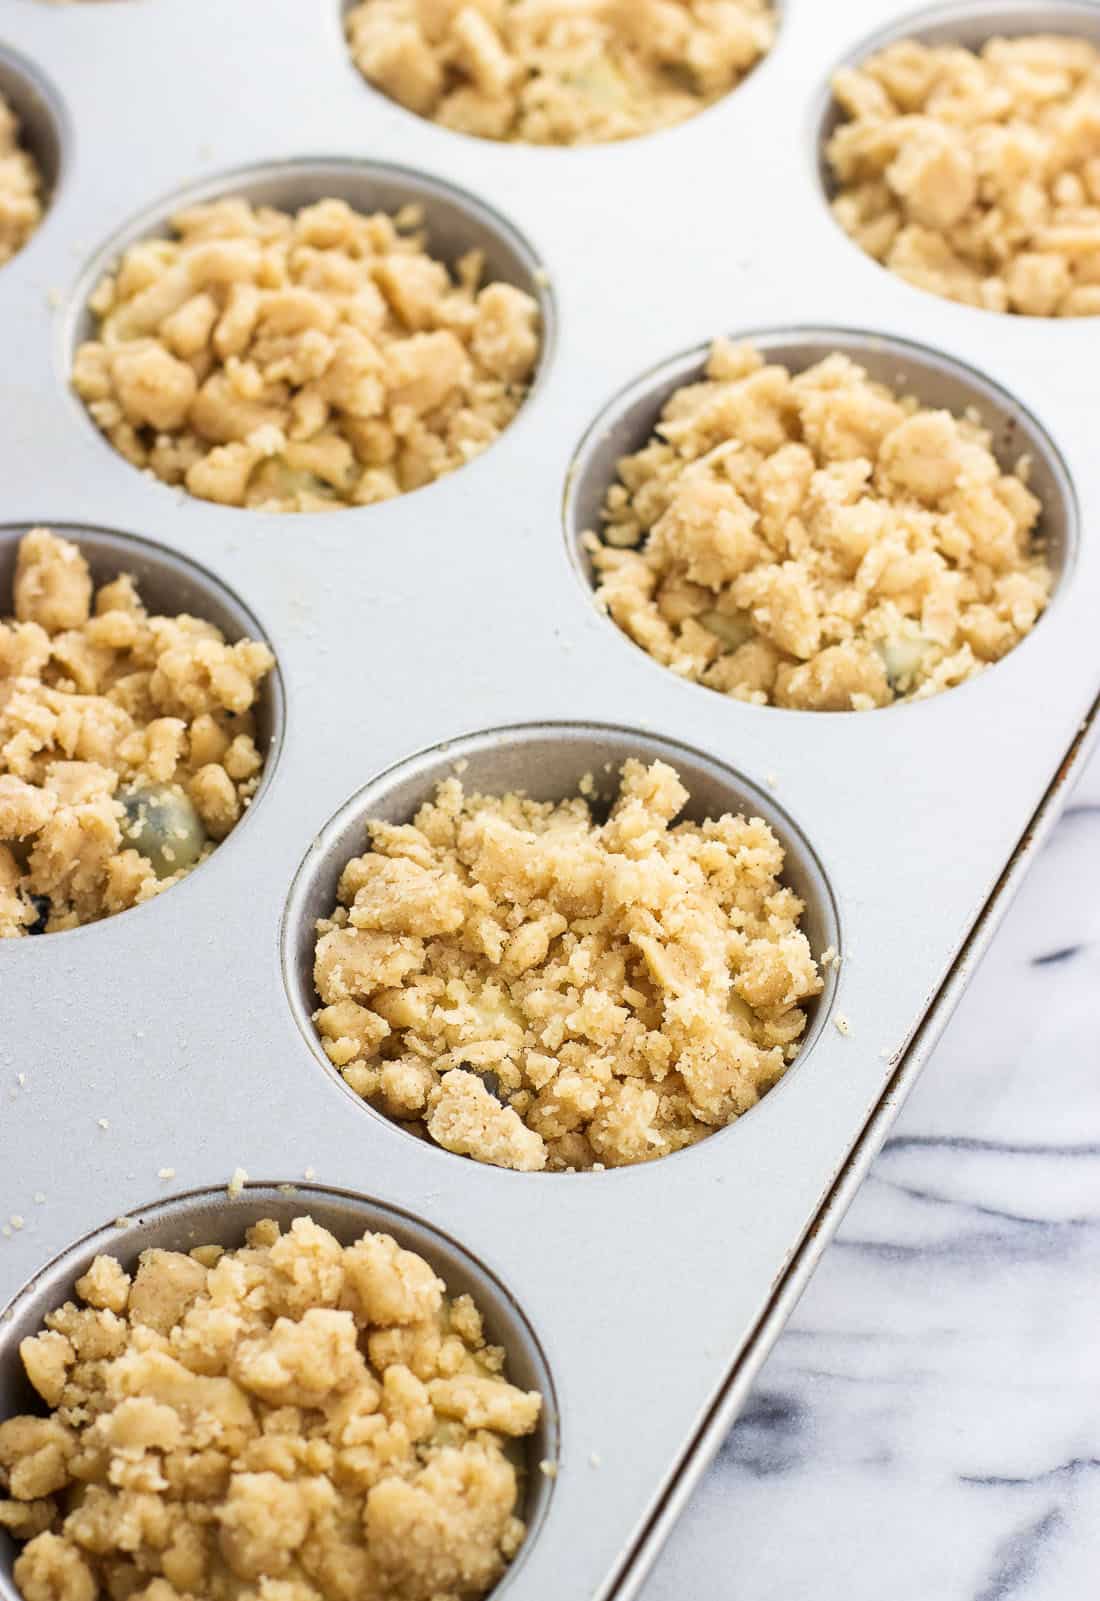 Muffin batter and crumble topping portioned out into a muffin tin before baking